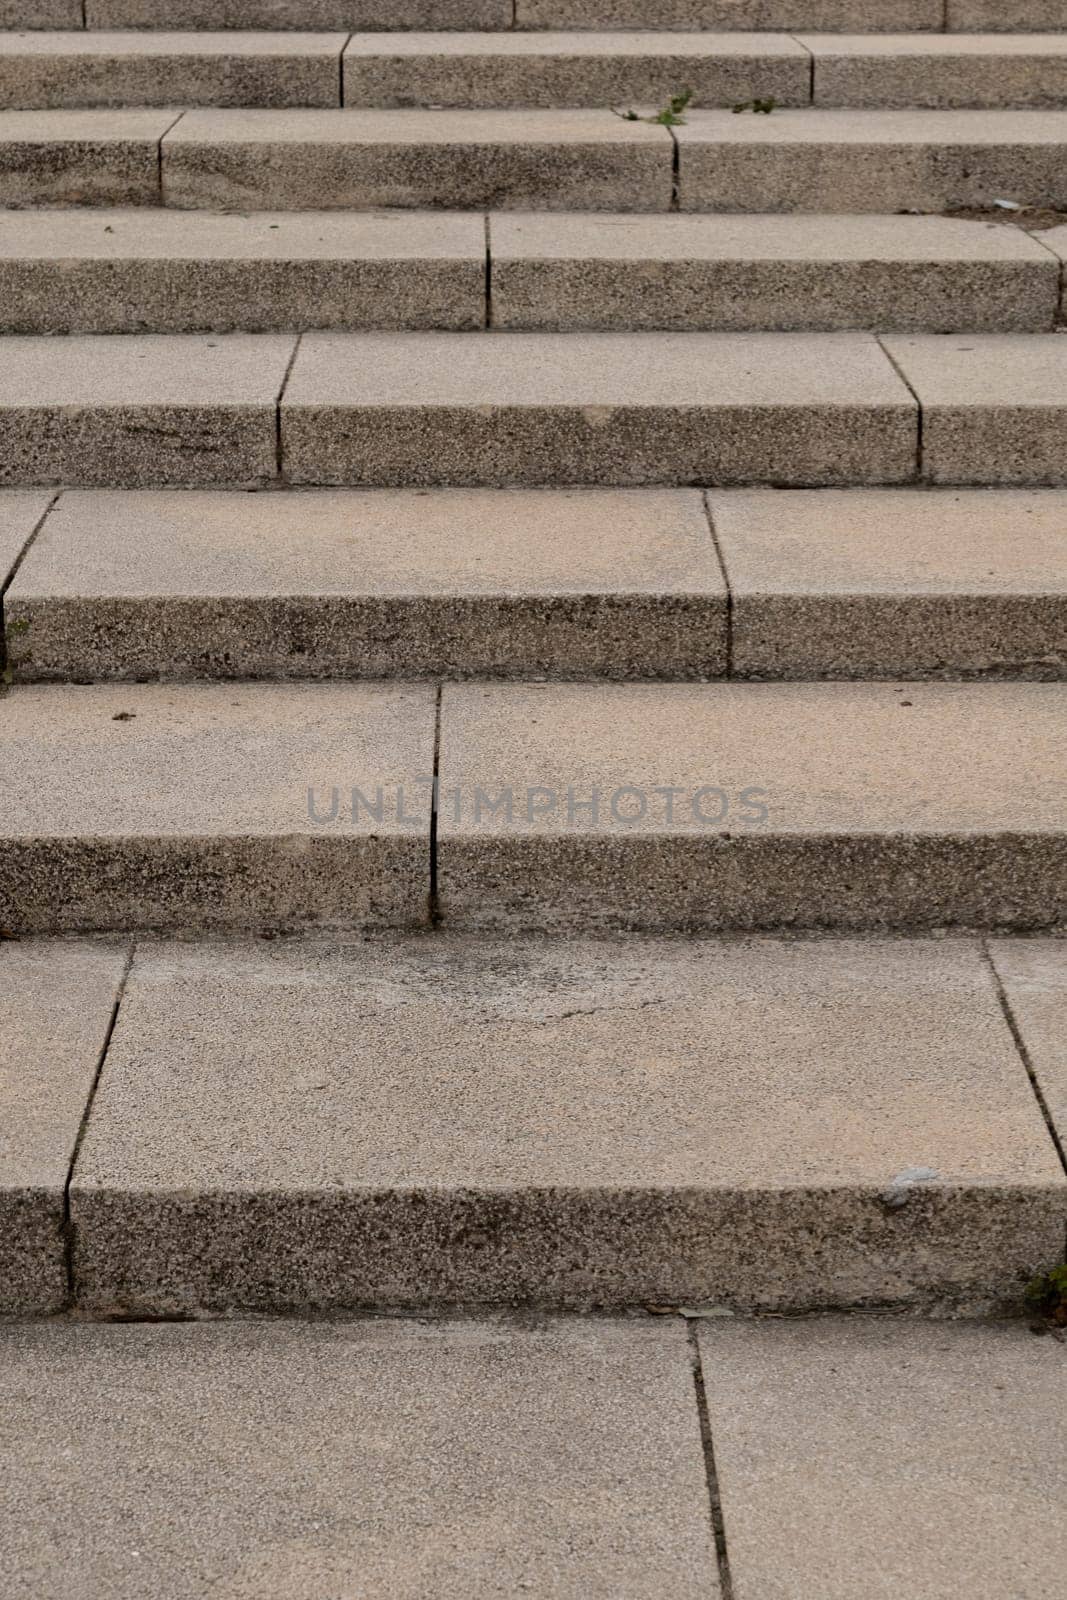 Stone stairs, wood flooring, brickwork, and rectangle road surface by apavlin